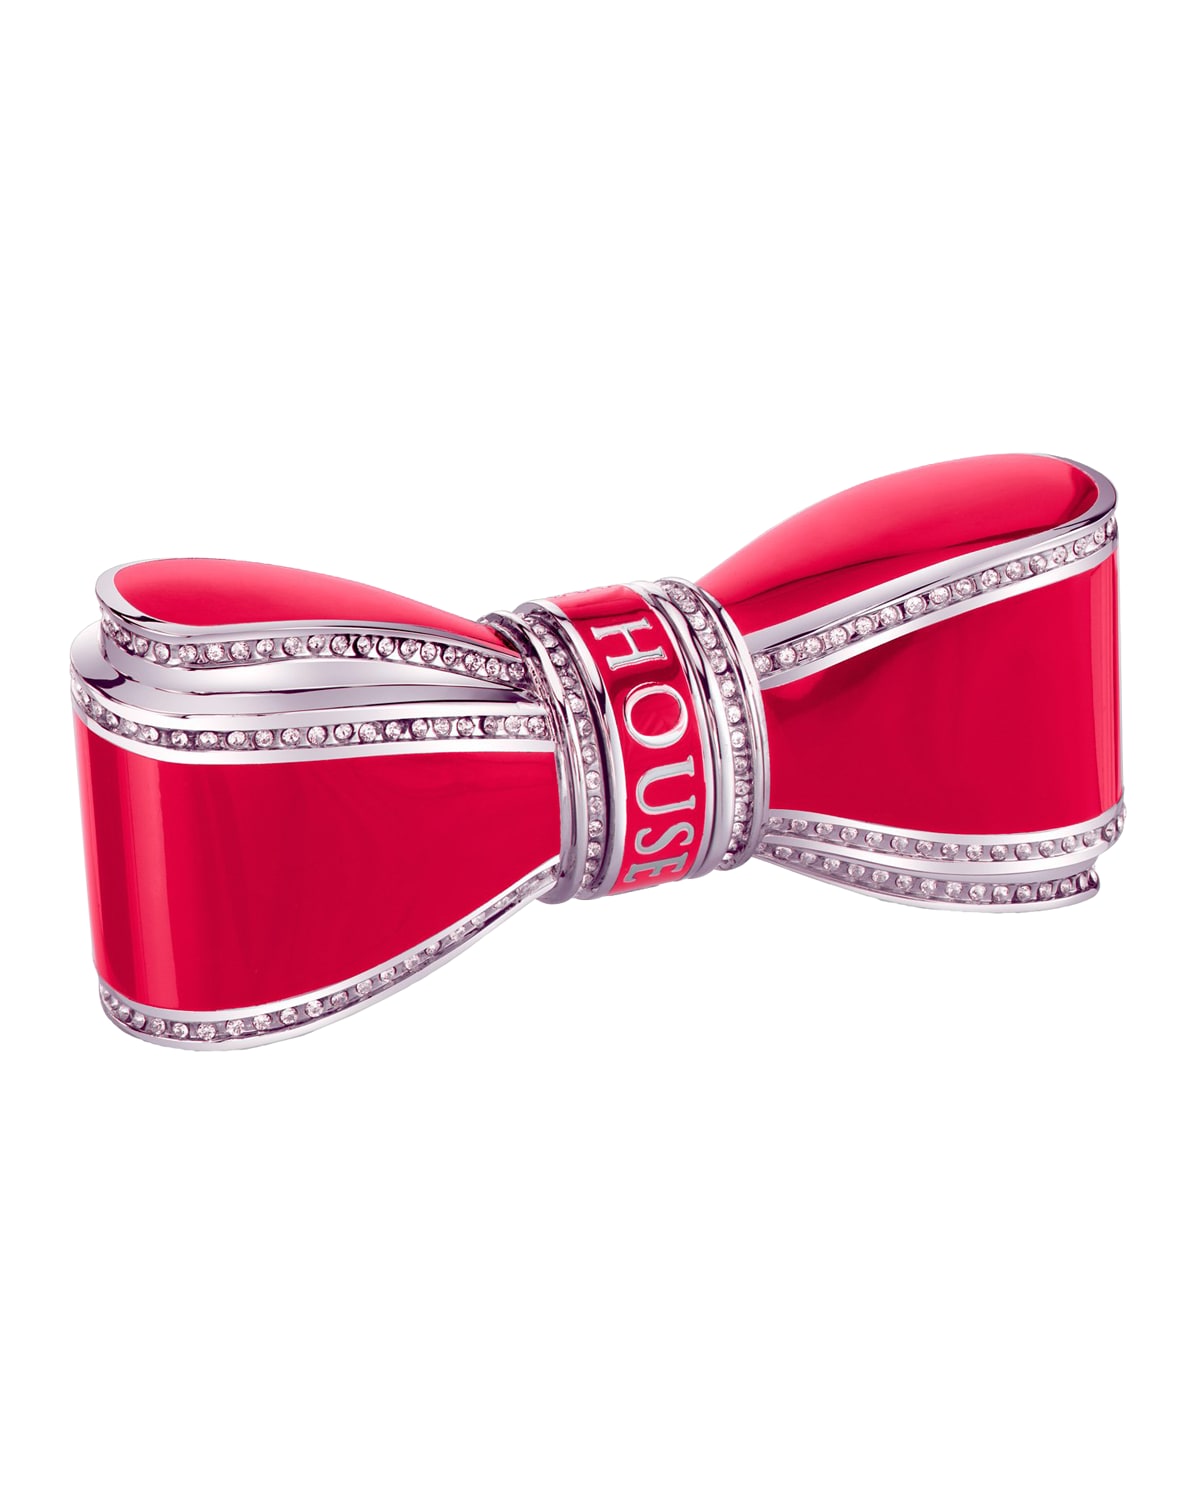 House of Sillage Bow Lipstick Case, Red